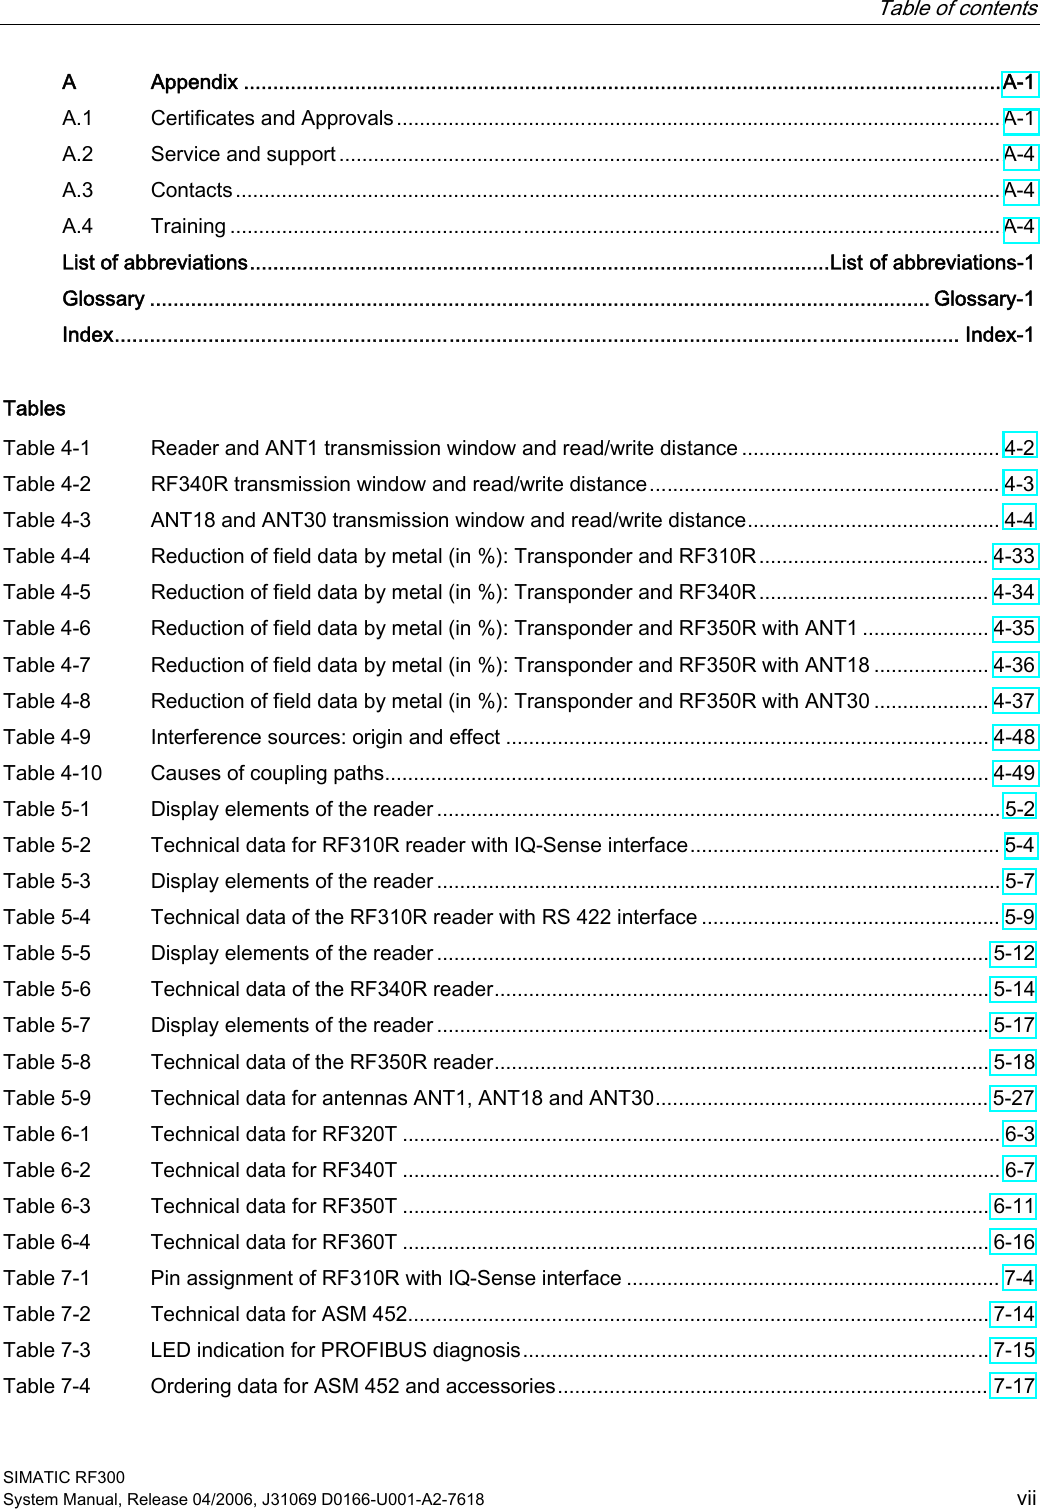   Table of contents SIMATIC RF300 System Manual, Release 04/2006, J31069 D0166-U001-A2-7618  vii A  Appendix .................................................................................................................................A-1 A.1  Certificates and Approvals.........................................................................................................A-1 A.2  Service and support ...................................................................................................................A-4 A.3  Contacts.....................................................................................................................................A-4 A.4  Training ......................................................................................................................................A-4   List of abbreviations...................................................................................................List of abbreviations-1   Glossary ..................................................................................................................................... Glossary-1   Index................................................................................................................................................ Index-1 Tables Table 4-1  Reader and ANT1 transmission window and read/write distance ............................................. 4-2 Table 4-2  RF340R transmission window and read/write distance............................................................. 4-3 Table 4-3  ANT18 and ANT30 transmission window and read/write distance............................................ 4-4 Table 4-4  Reduction of field data by metal (in %): Transponder and RF310R........................................ 4-33 Table 4-5  Reduction of field data by metal (in %): Transponder and RF340R........................................ 4-34 Table 4-6  Reduction of field data by metal (in %): Transponder and RF350R with ANT1 ...................... 4-35 Table 4-7  Reduction of field data by metal (in %): Transponder and RF350R with ANT18 .................... 4-36 Table 4-8  Reduction of field data by metal (in %): Transponder and RF350R with ANT30 .................... 4-37 Table 4-9  Interference sources: origin and effect .................................................................................... 4-48 Table 4-10  Causes of coupling paths......................................................................................................... 4-49 Table 5-1  Display elements of the reader .................................................................................................. 5-2 Table 5-2  Technical data for RF310R reader with IQ-Sense interface...................................................... 5-4 Table 5-3  Display elements of the reader .................................................................................................. 5-7 Table 5-4  Technical data of the RF310R reader with RS 422 interface .................................................... 5-9 Table 5-5  Display elements of the reader ................................................................................................ 5-12 Table 5-6  Technical data of the RF340R reader...................................................................................... 5-14 Table 5-7  Display elements of the reader ................................................................................................ 5-17 Table 5-8  Technical data of the RF350R reader...................................................................................... 5-18 Table 5-9  Technical data for antennas ANT1, ANT18 and ANT30.......................................................... 5-27 Table 6-1  Technical data for RF320T ........................................................................................................ 6-3 Table 6-2  Technical data for RF340T ........................................................................................................ 6-7 Table 6-3  Technical data for RF350T ...................................................................................................... 6-11 Table 6-4  Technical data for RF360T ...................................................................................................... 6-16 Table 7-1  Pin assignment of RF310R with IQ-Sense interface ................................................................. 7-4 Table 7-2  Technical data for ASM 452..................................................................................................... 7-14 Table 7-3  LED indication for PROFIBUS diagnosis................................................................................. 7-15 Table 7-4  Ordering data for ASM 452 and accessories........................................................................... 7-17 